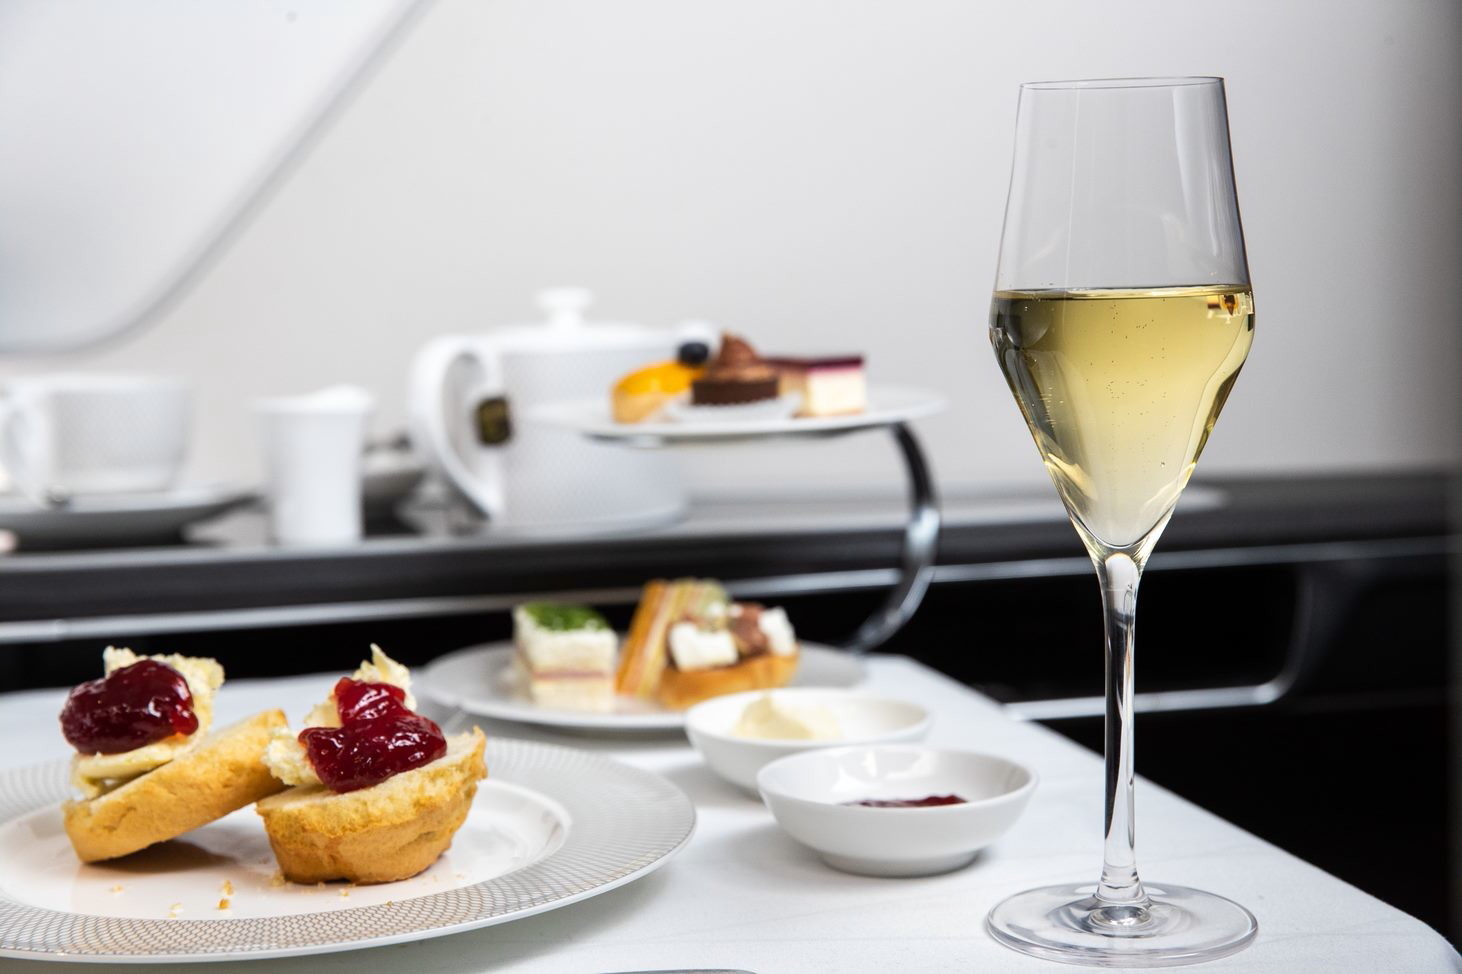 The airline’s chefs have designed new a la carte menus that focus on fresh seasonal ingredients of British provenance. The new menus will be served on bone china crockery, designed exclusively for the airline by high-end British tableware designer, William Edwards. The new tableware will be accompanied by contemporary cutlery from Studio William. Click to enlarge.